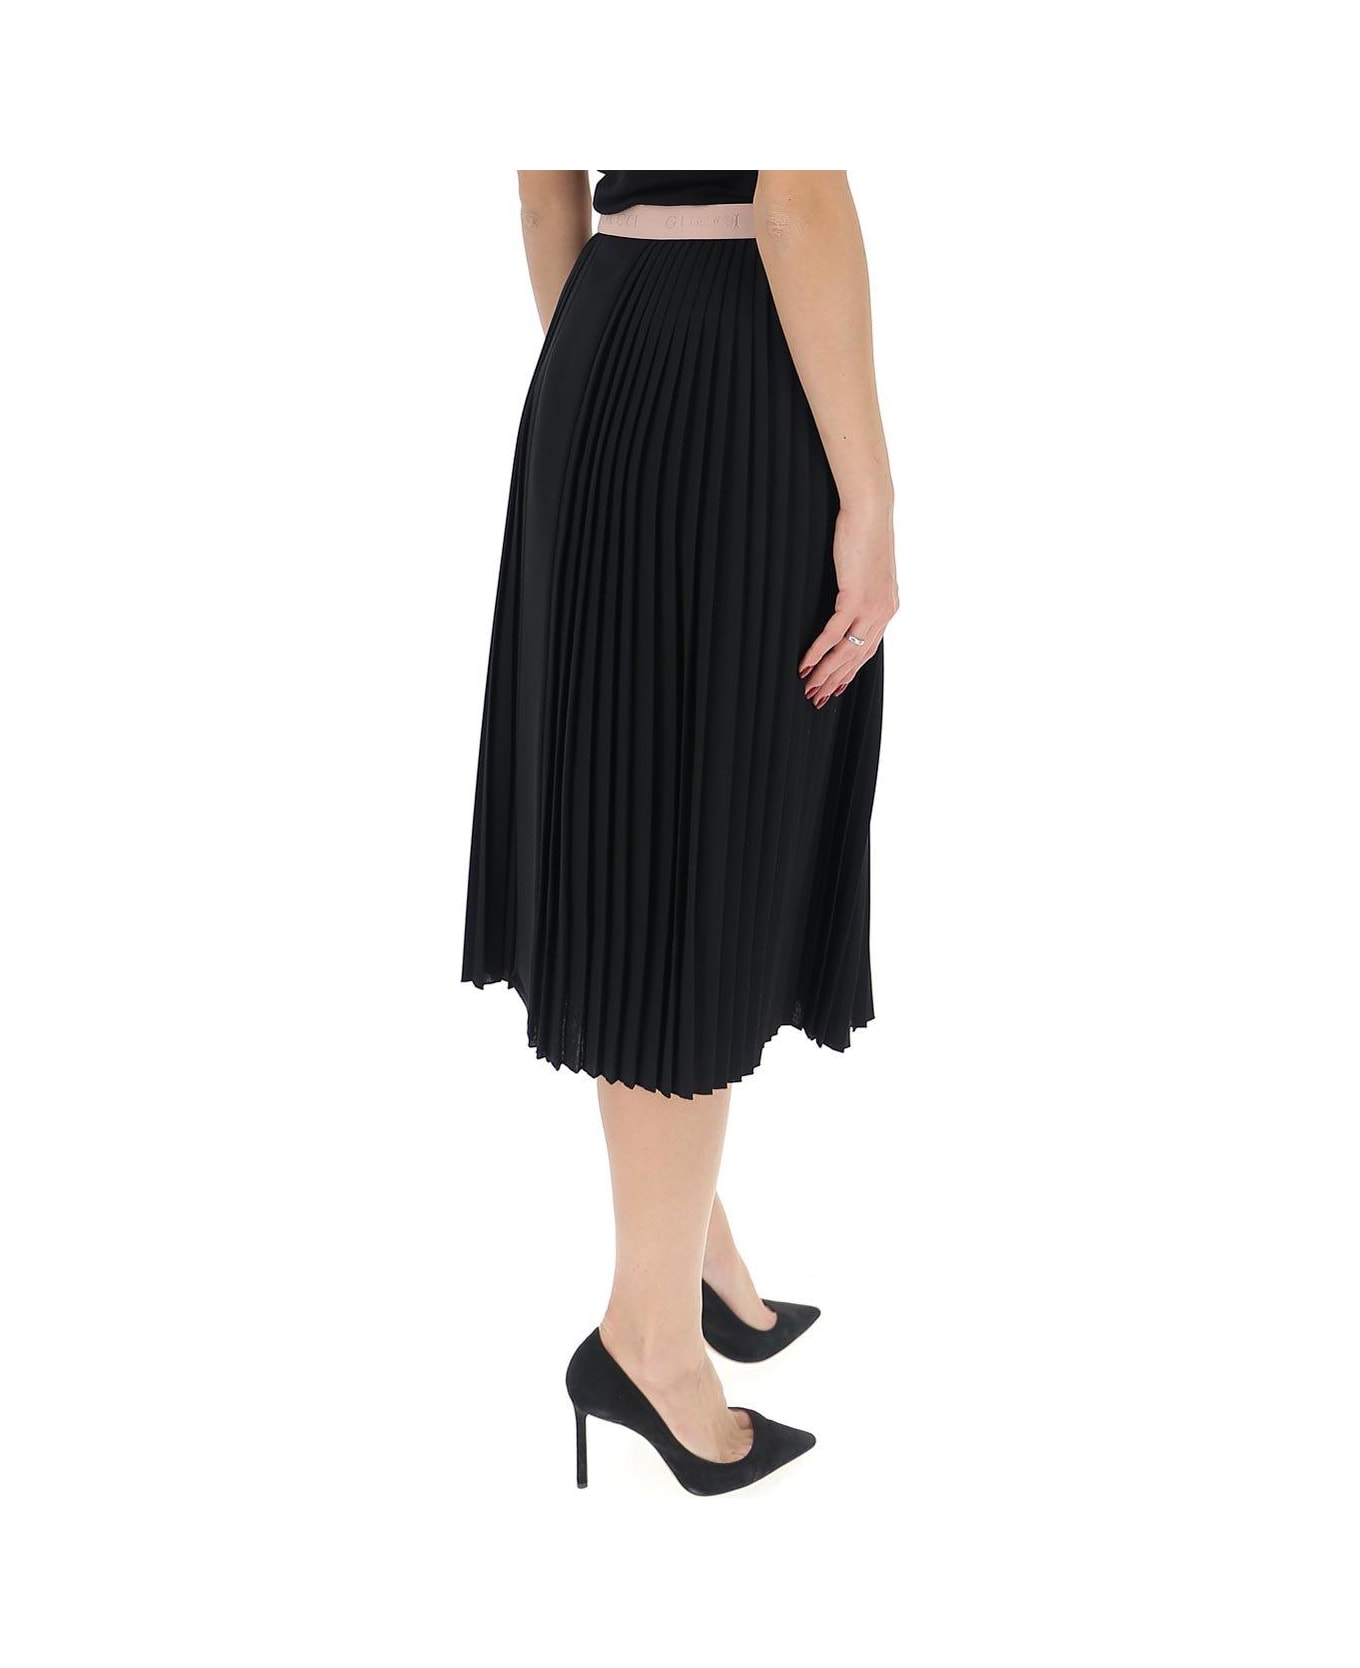 Gucci Contrasting Trim Pleated Skirt